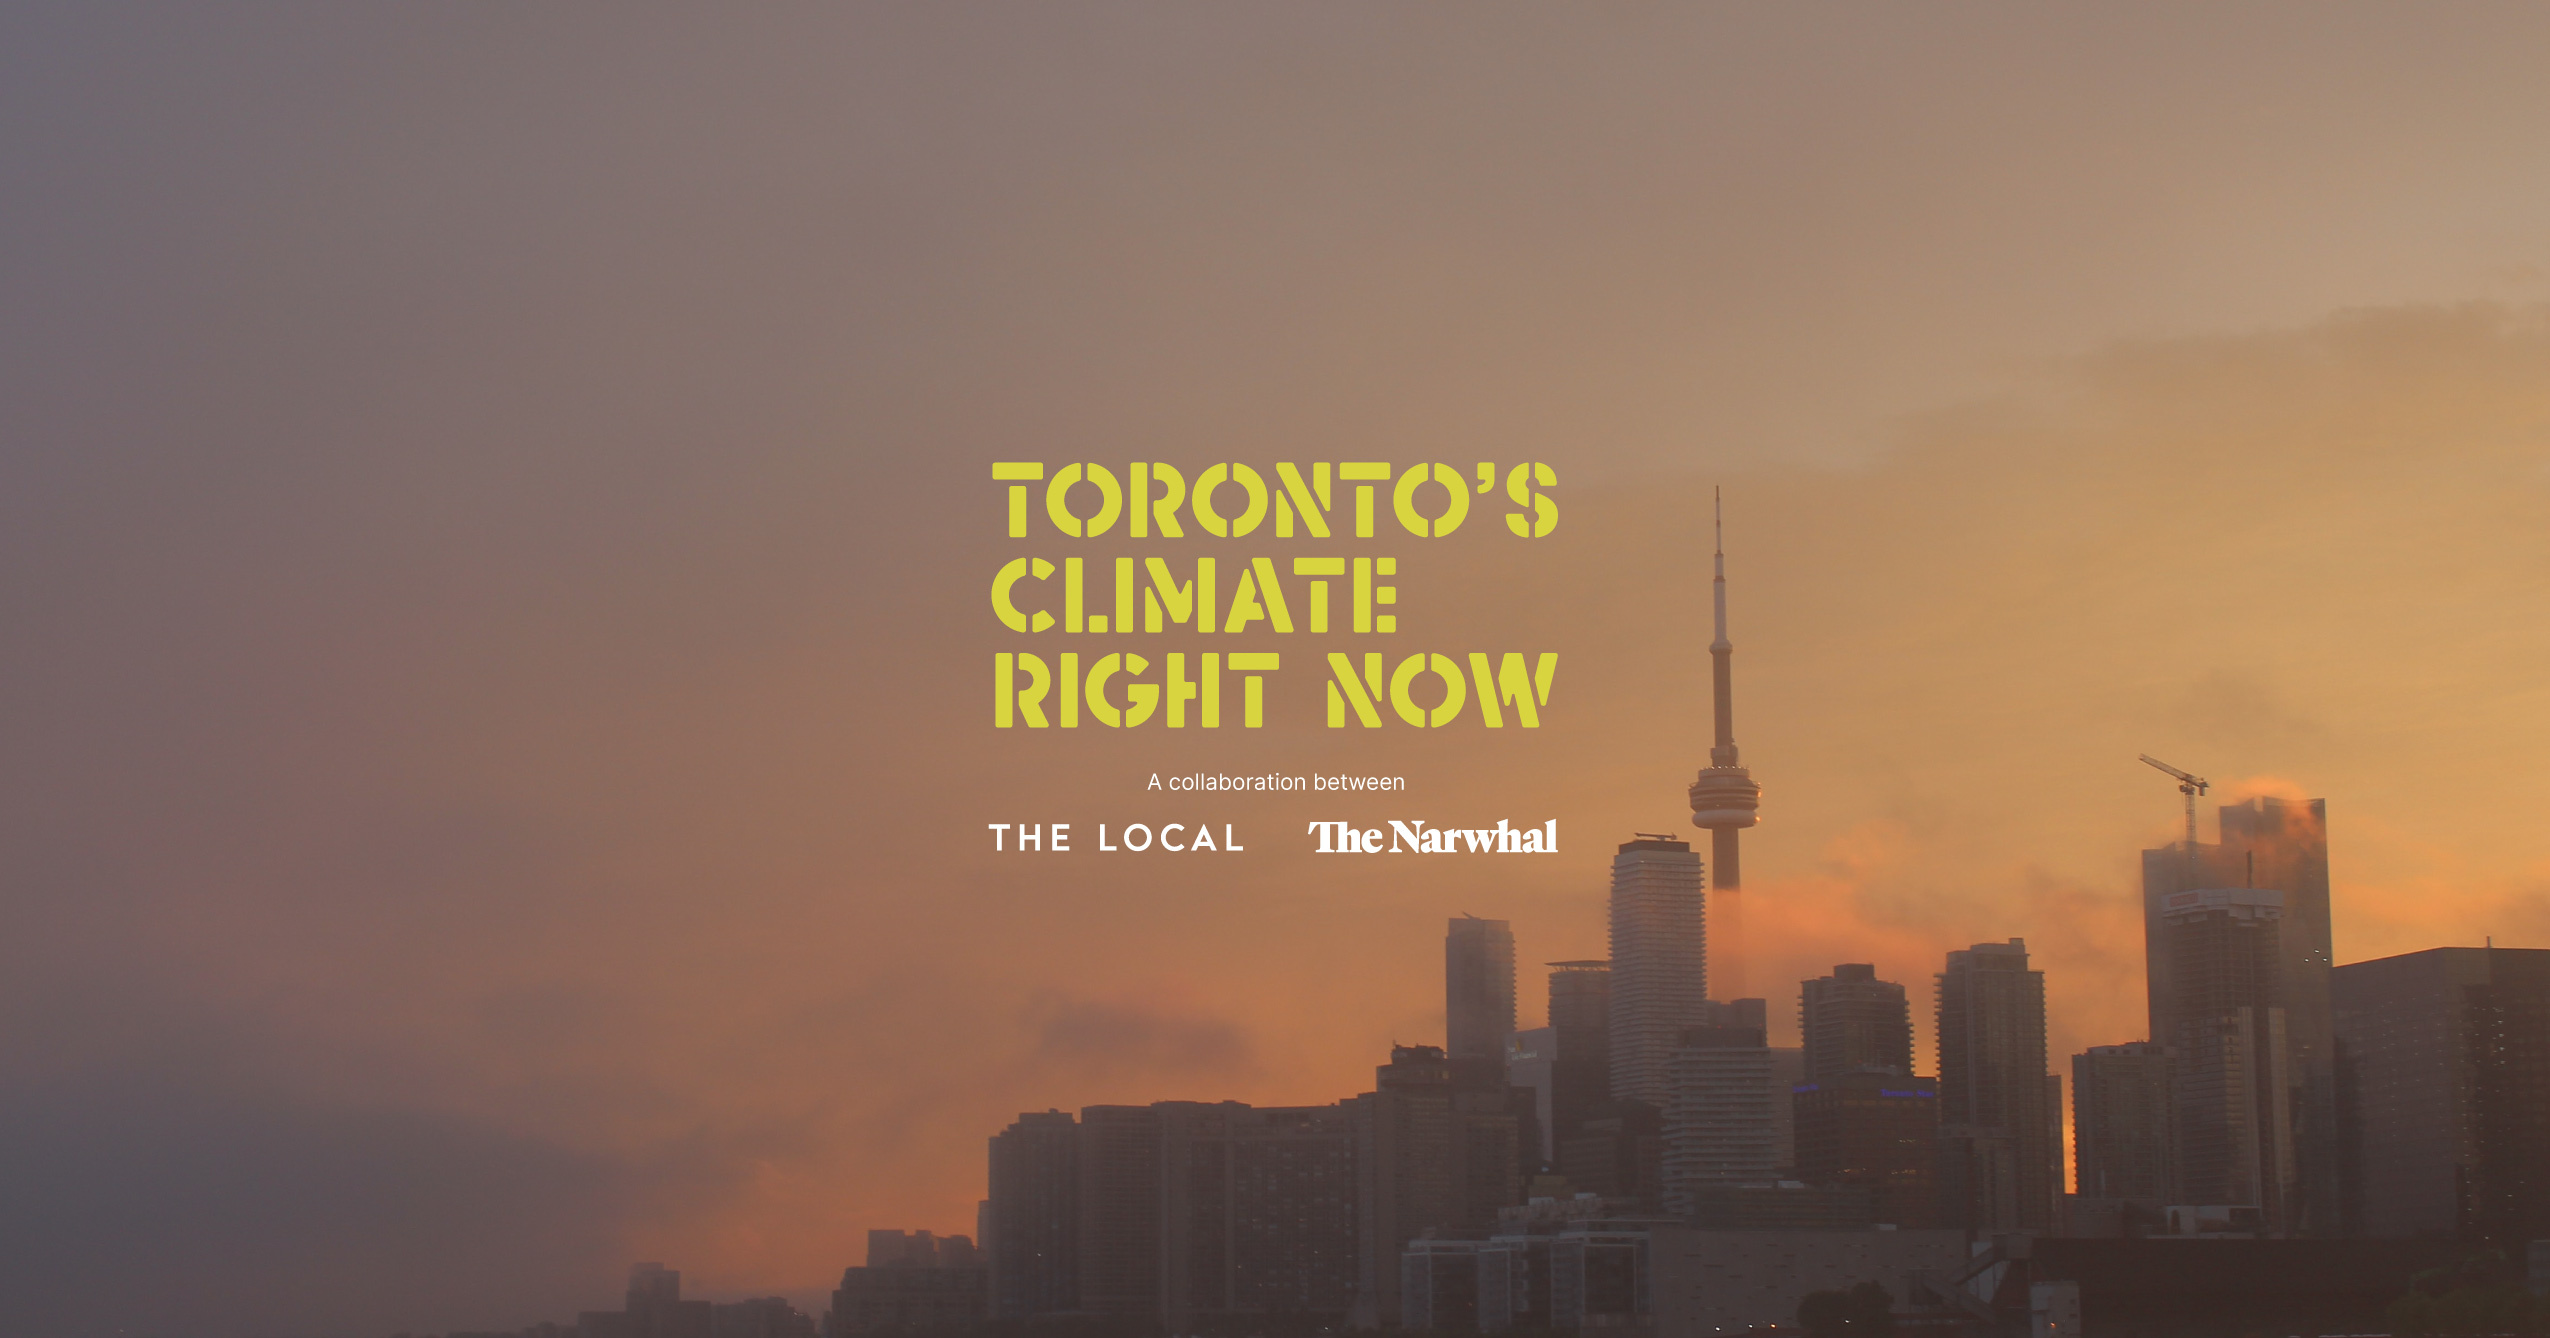 Toronto's Climate Right Now: A collaboration between The Narwhal